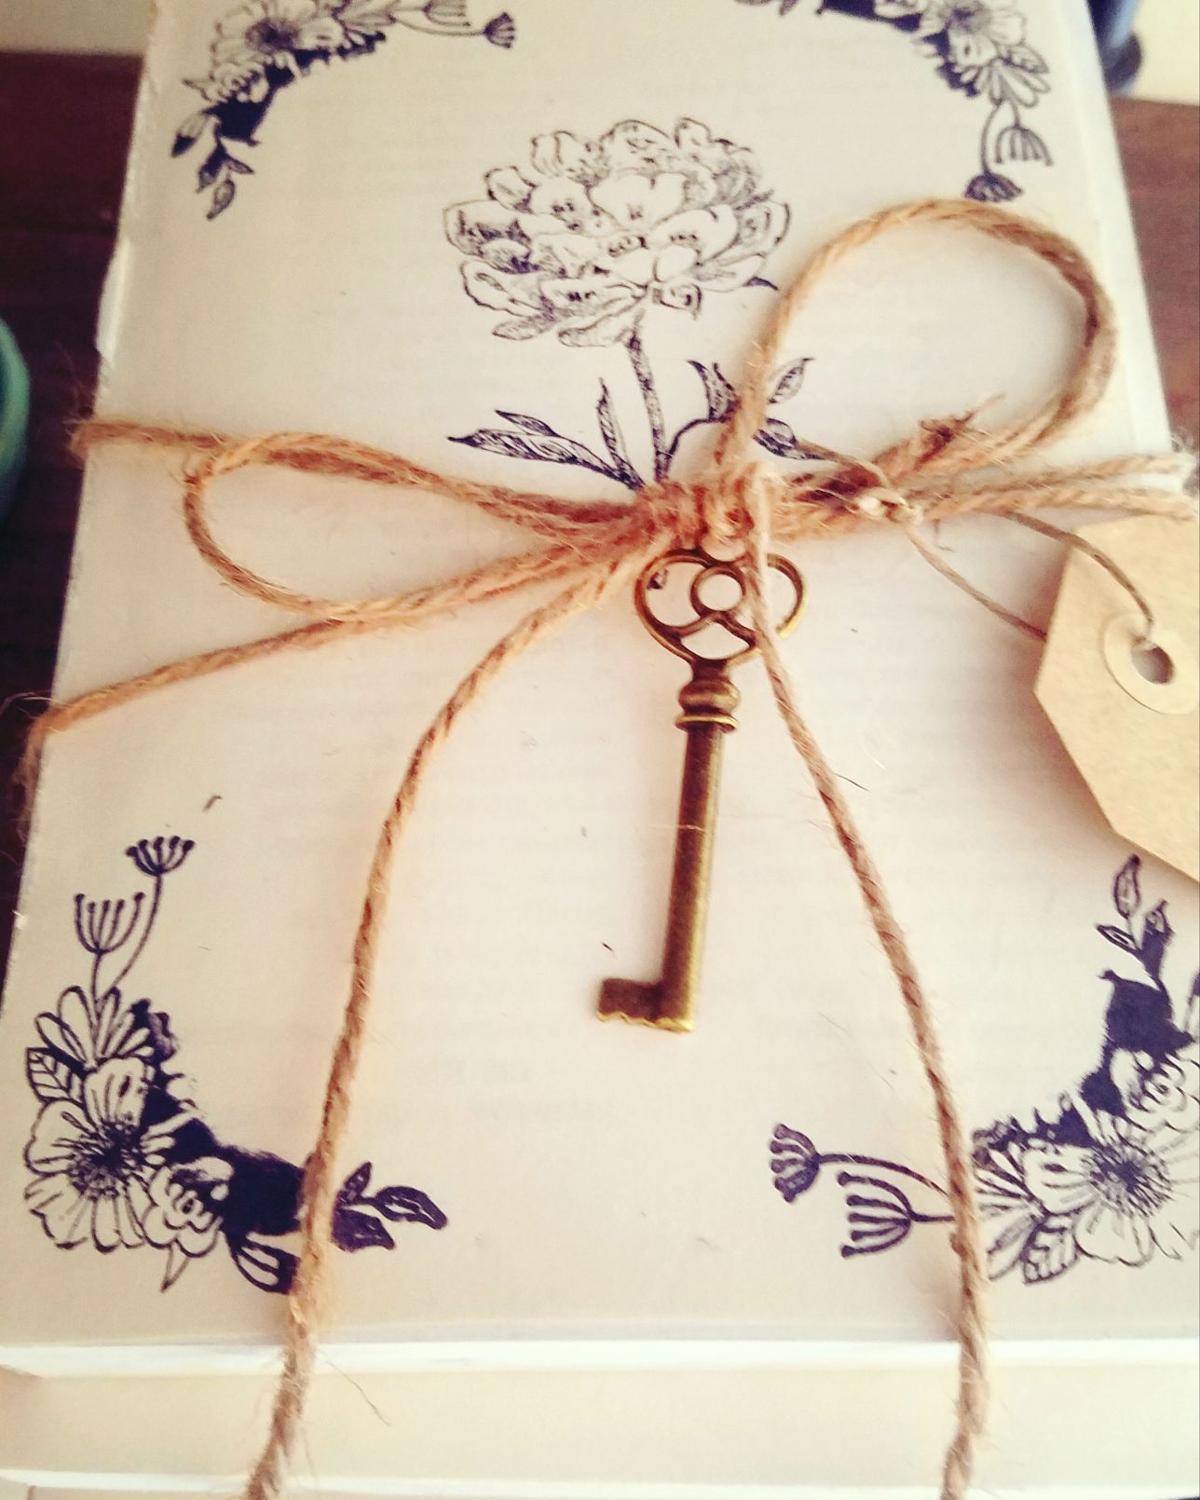 Order adorable bookish décor for your wedding from this online